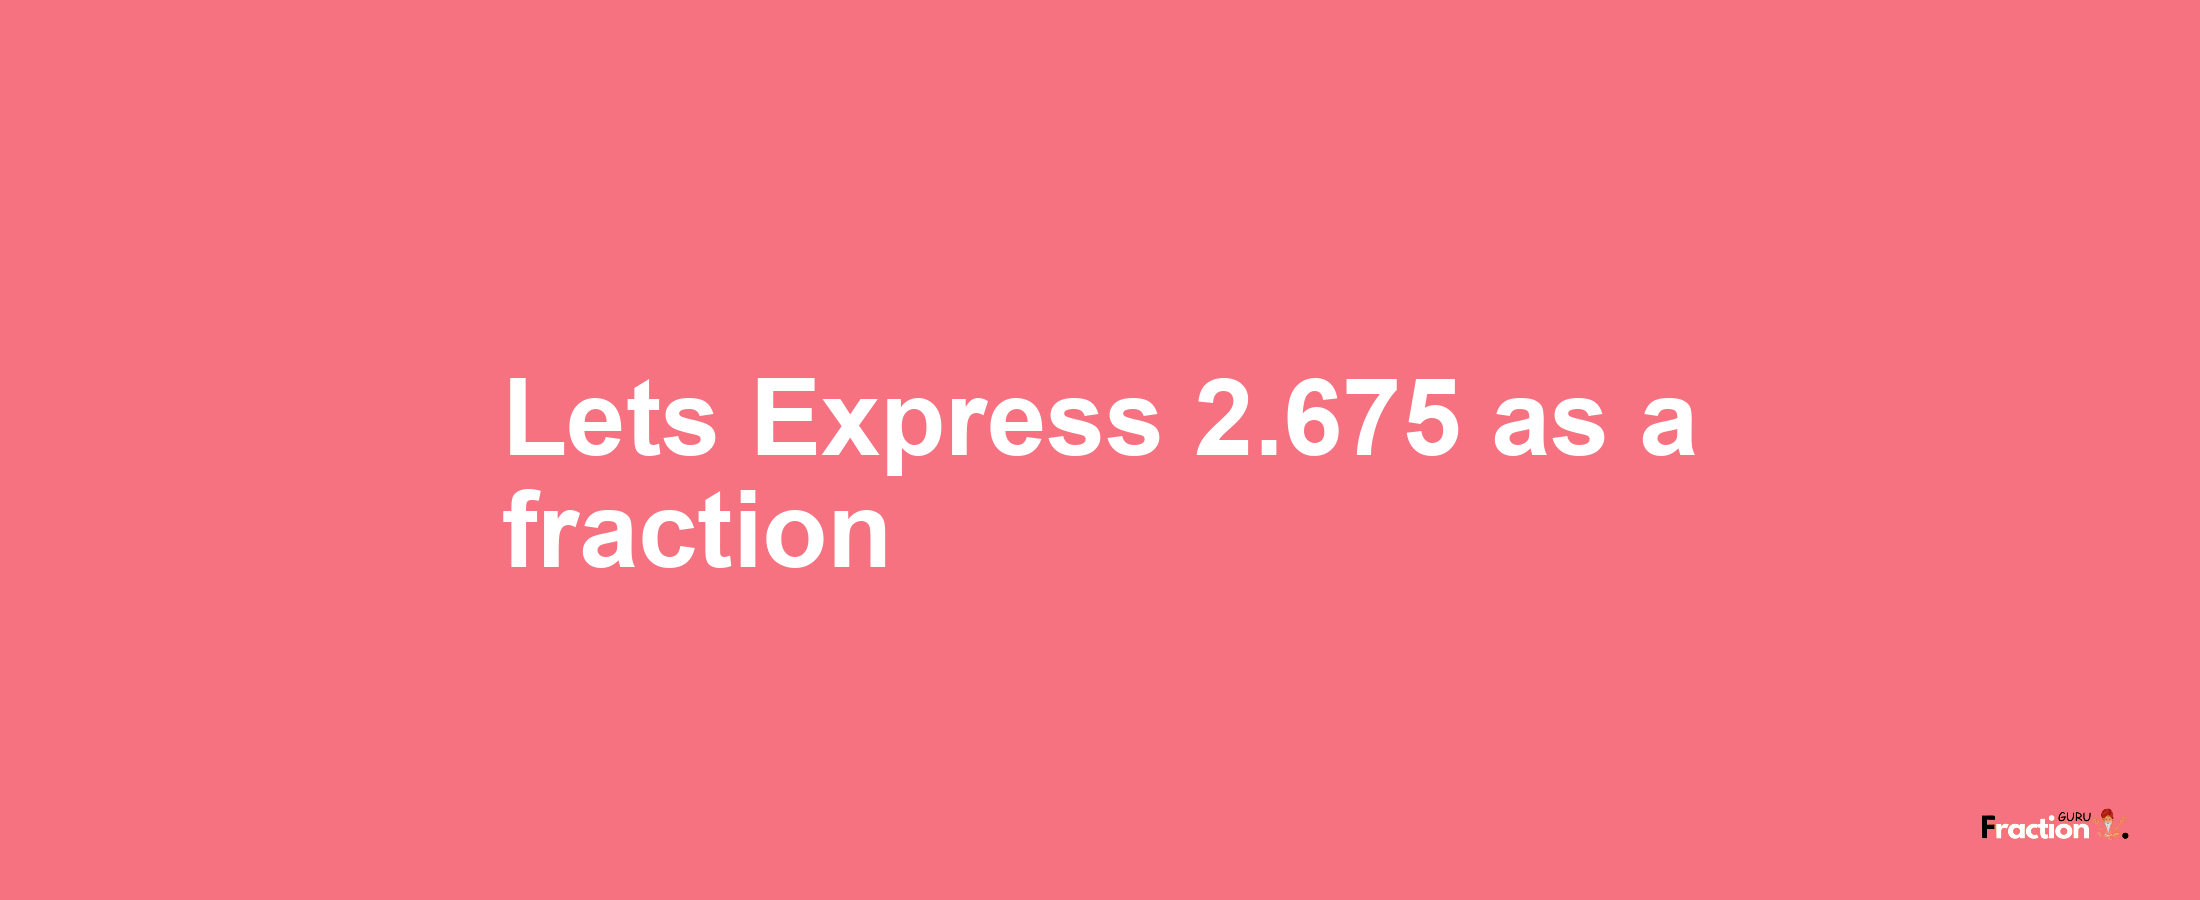 Lets Express 2.675 as afraction